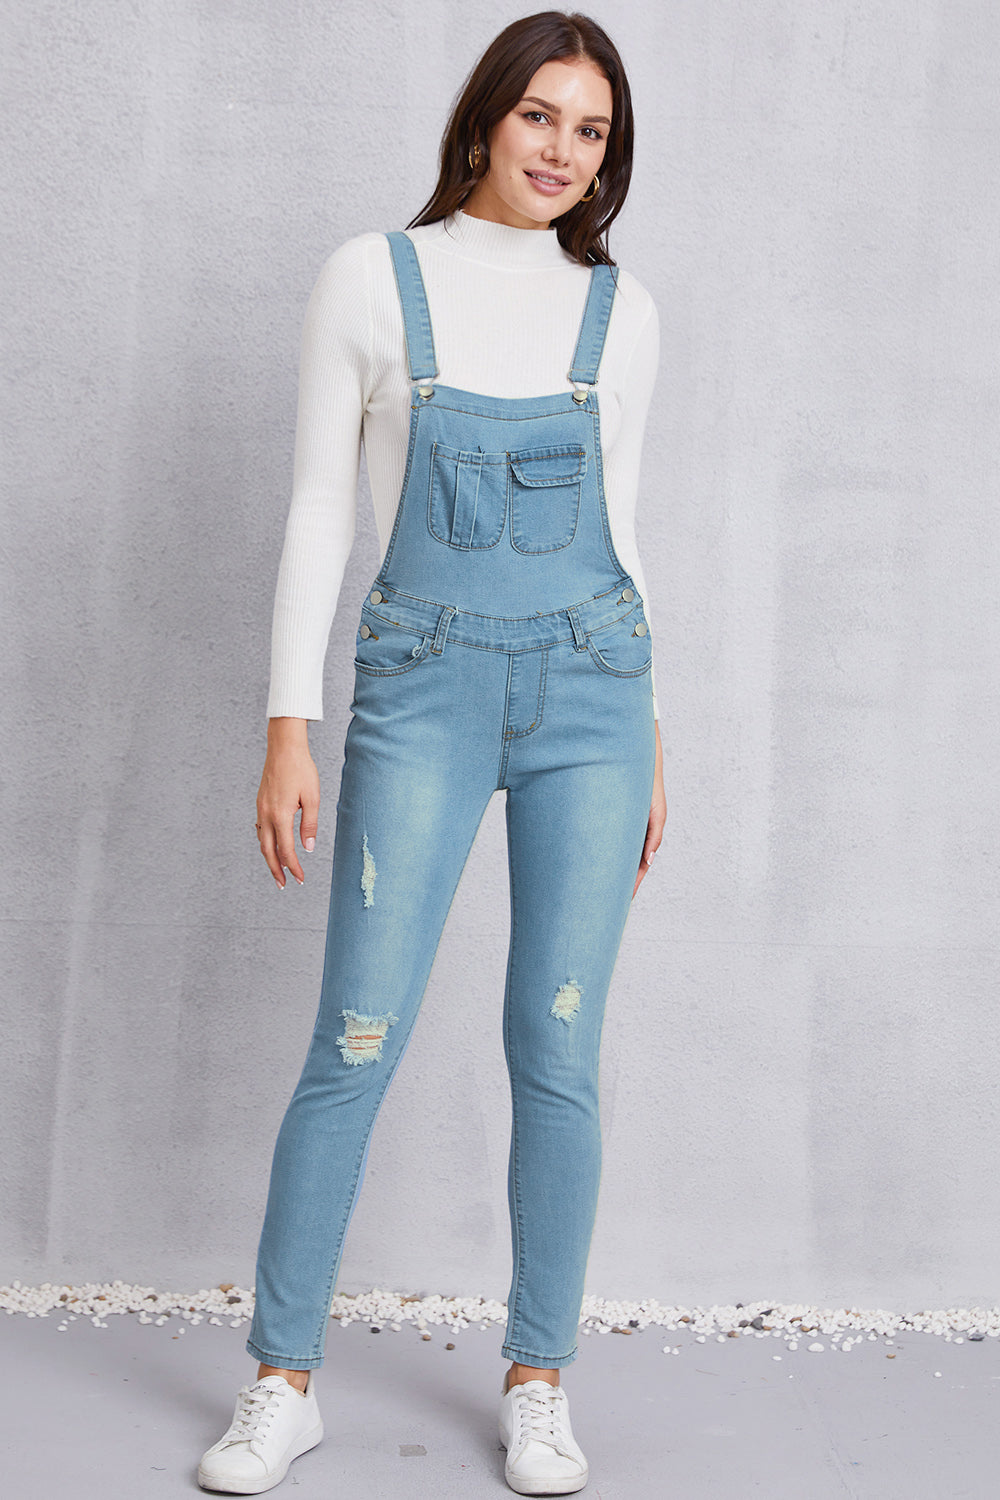 Distressed Washed Denim Overalls with Pockets Bottom wear